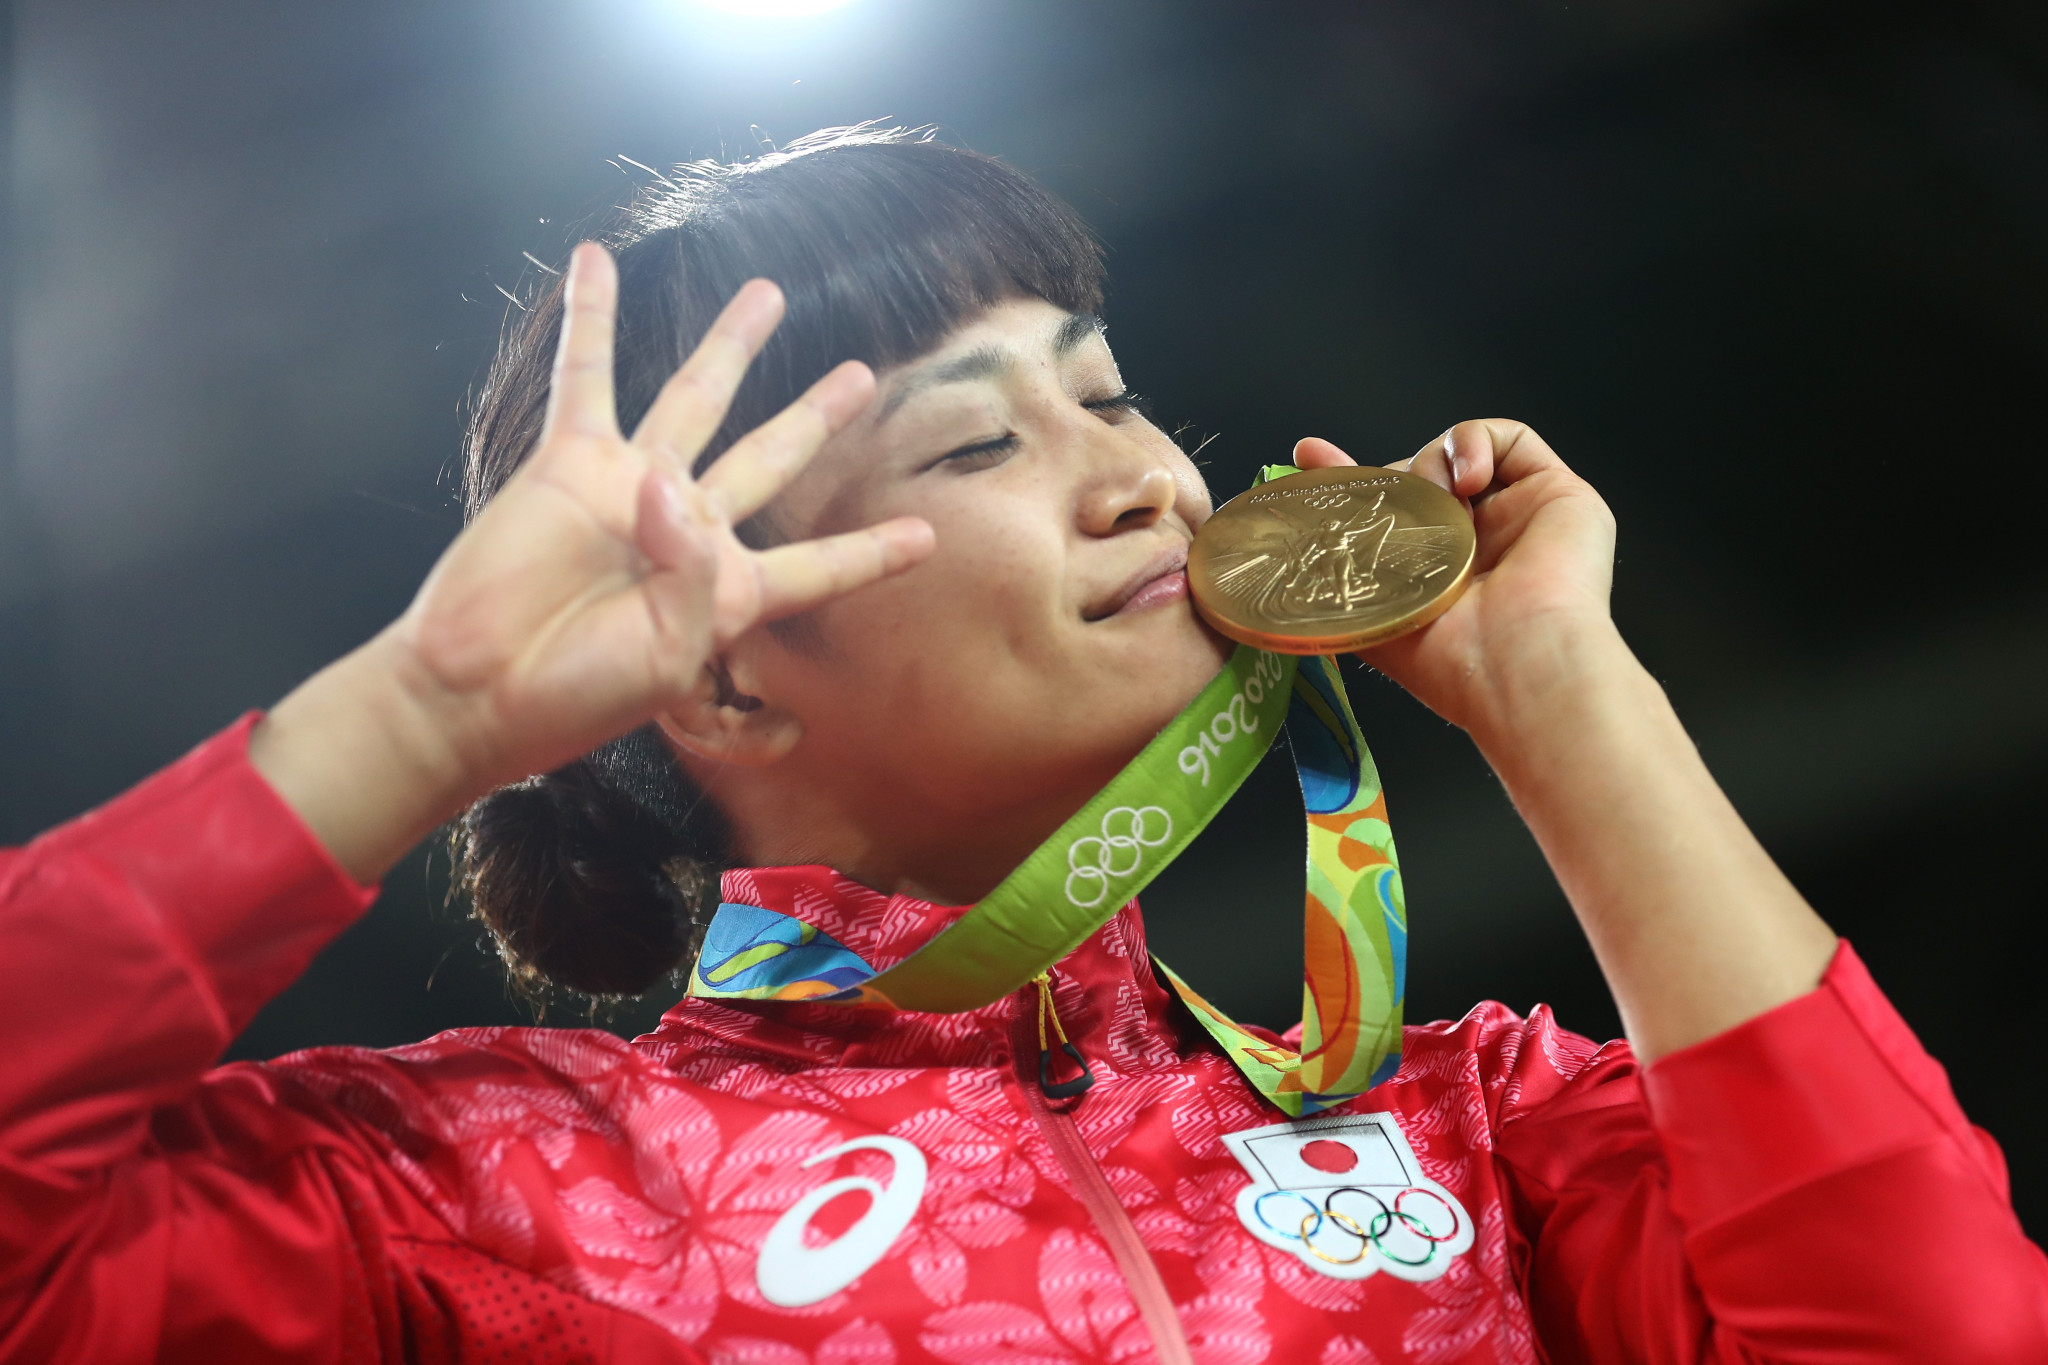 Kaori Icho claimed her fourth straight Olympic gold medal at Rio 2016 ©Getty Images